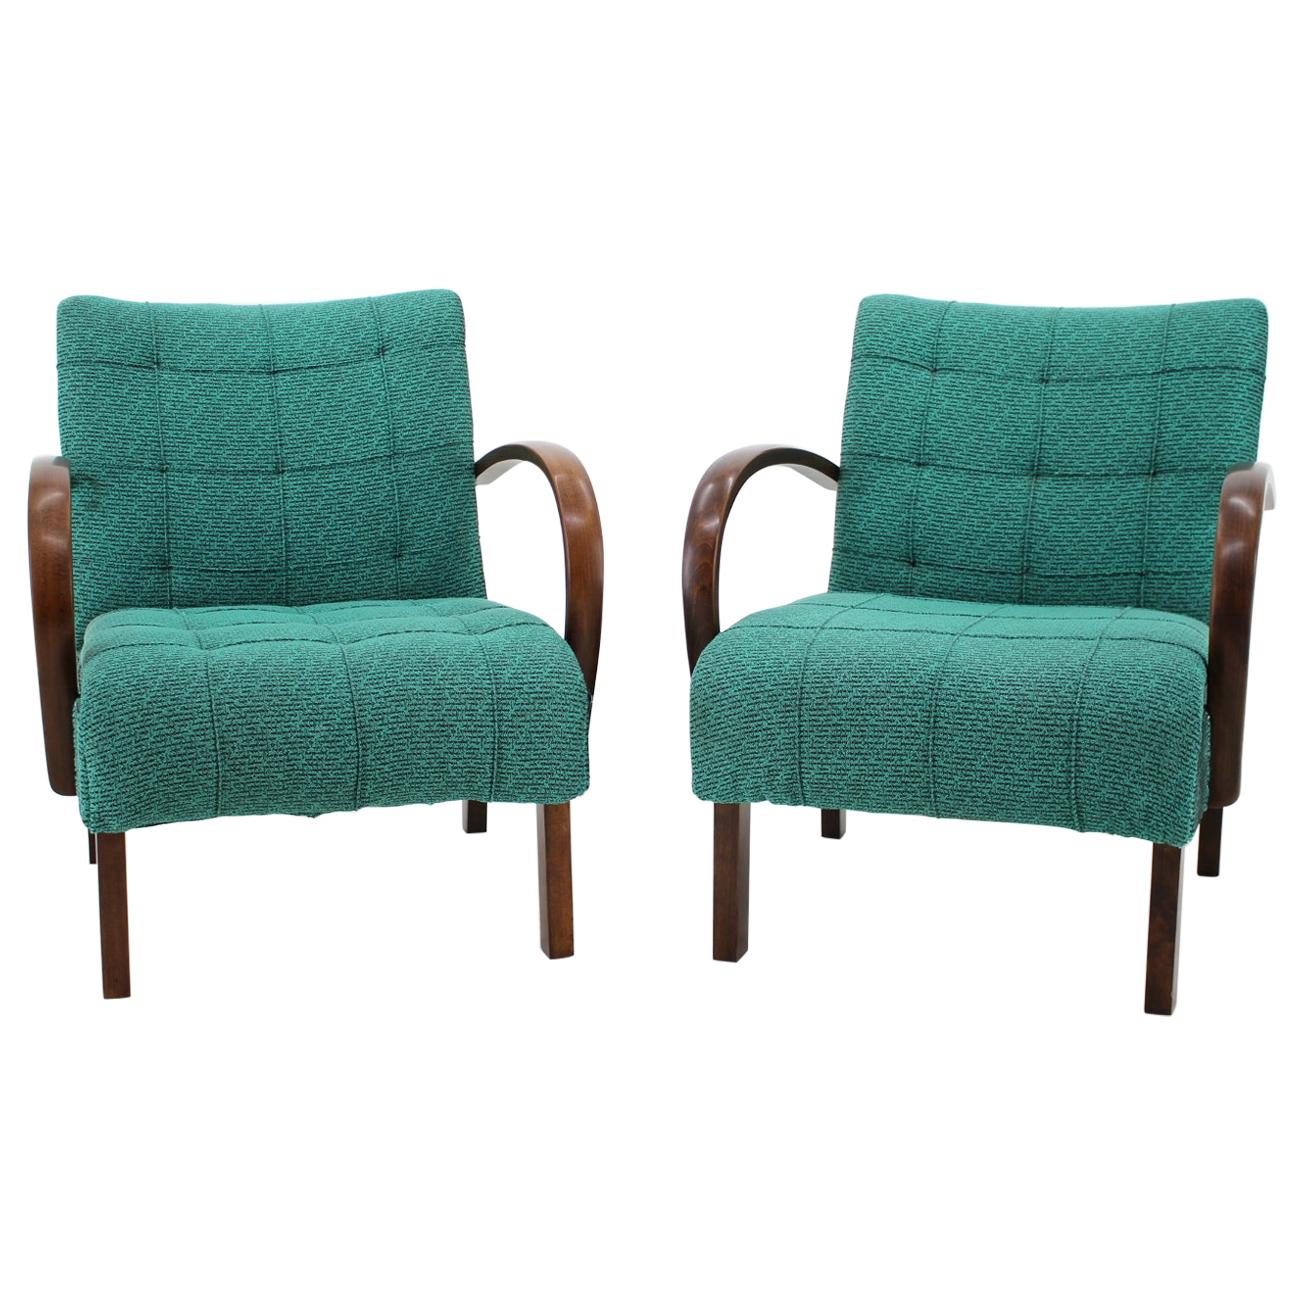 Set of Two Rare Catalog Armchairs, Thonet, 1940s